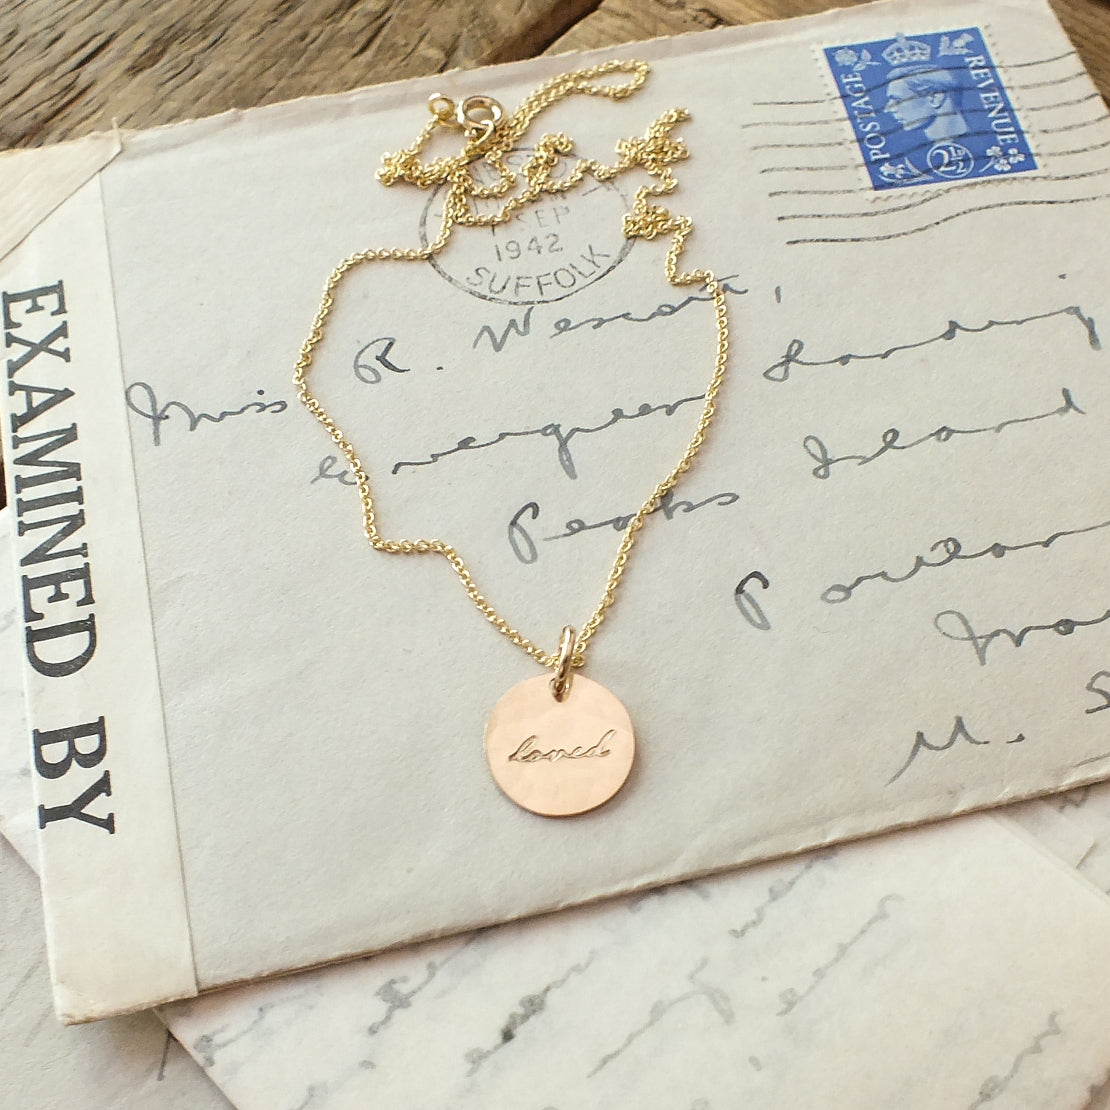 A Loved Necklace by Becoming Jewelry with a circular pendant inscribed with the name &quot;linda&quot; resting on top of an old, handwritten letter.